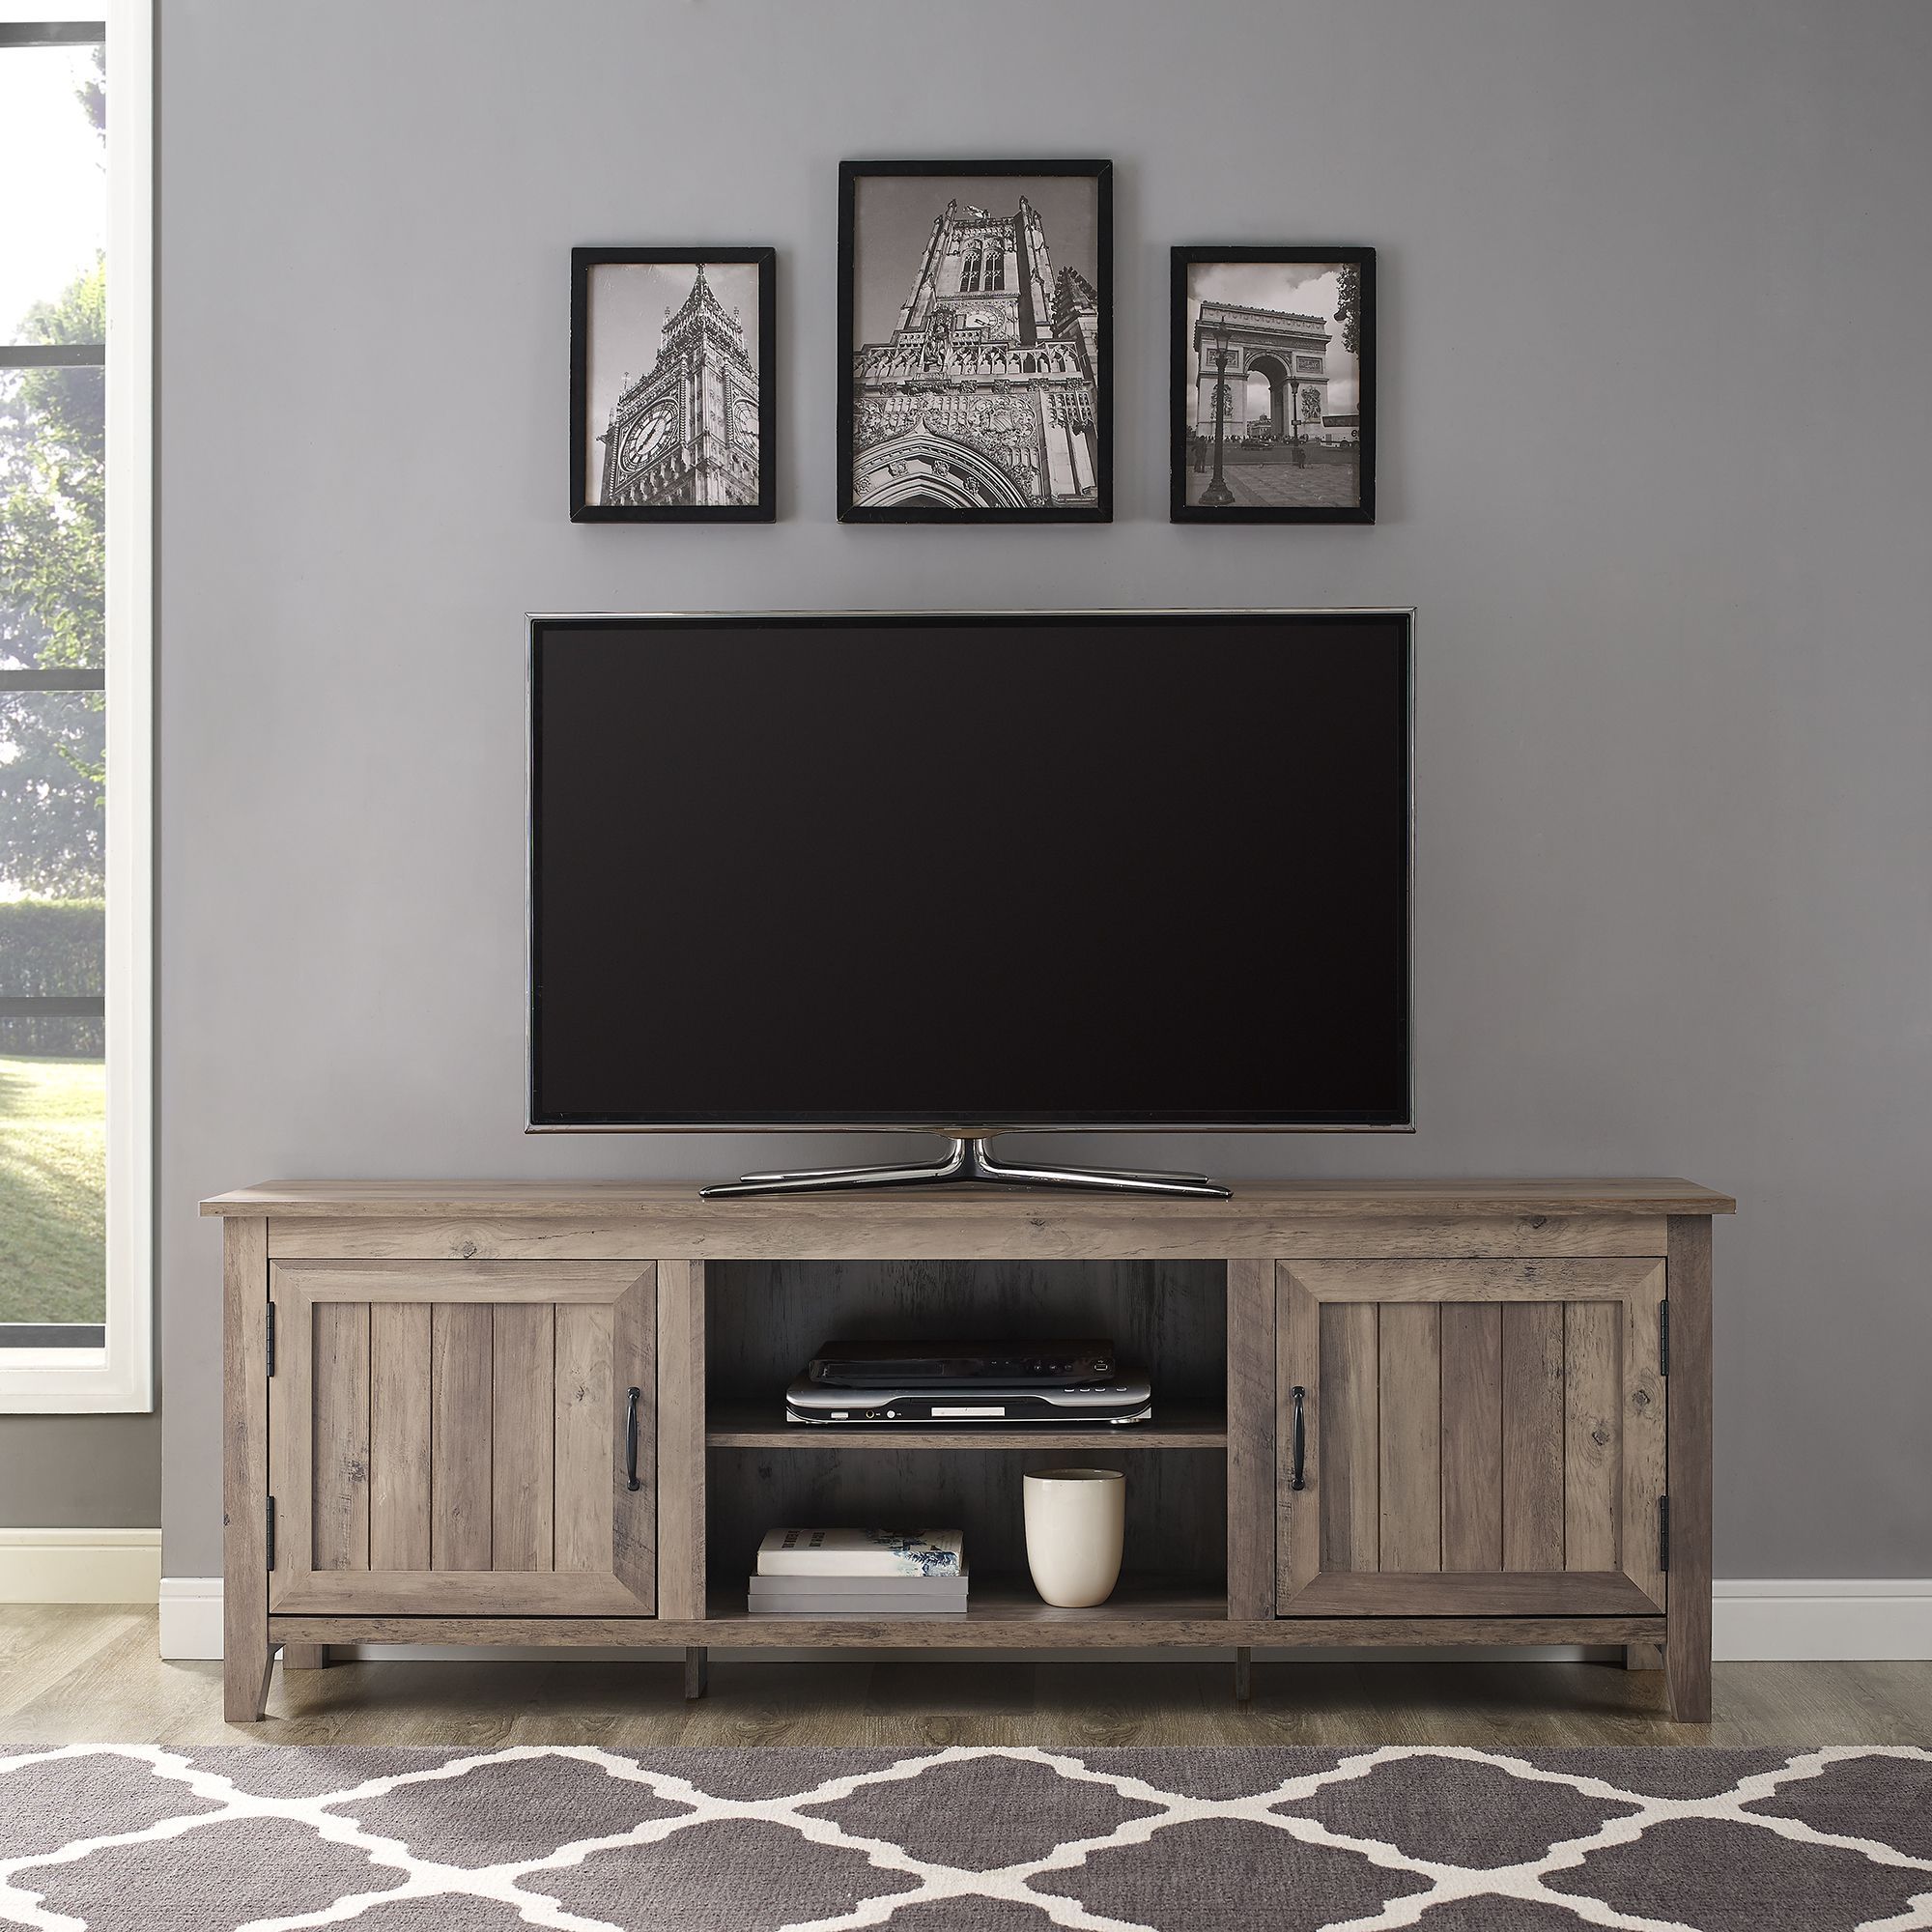 Woven Paths Farmhouse Grooved Door Tv Stand For Tvs Up To In Woven Paths Farmhouse Barn Door Tv Stands In Multiple Finishes (View 4 of 15)